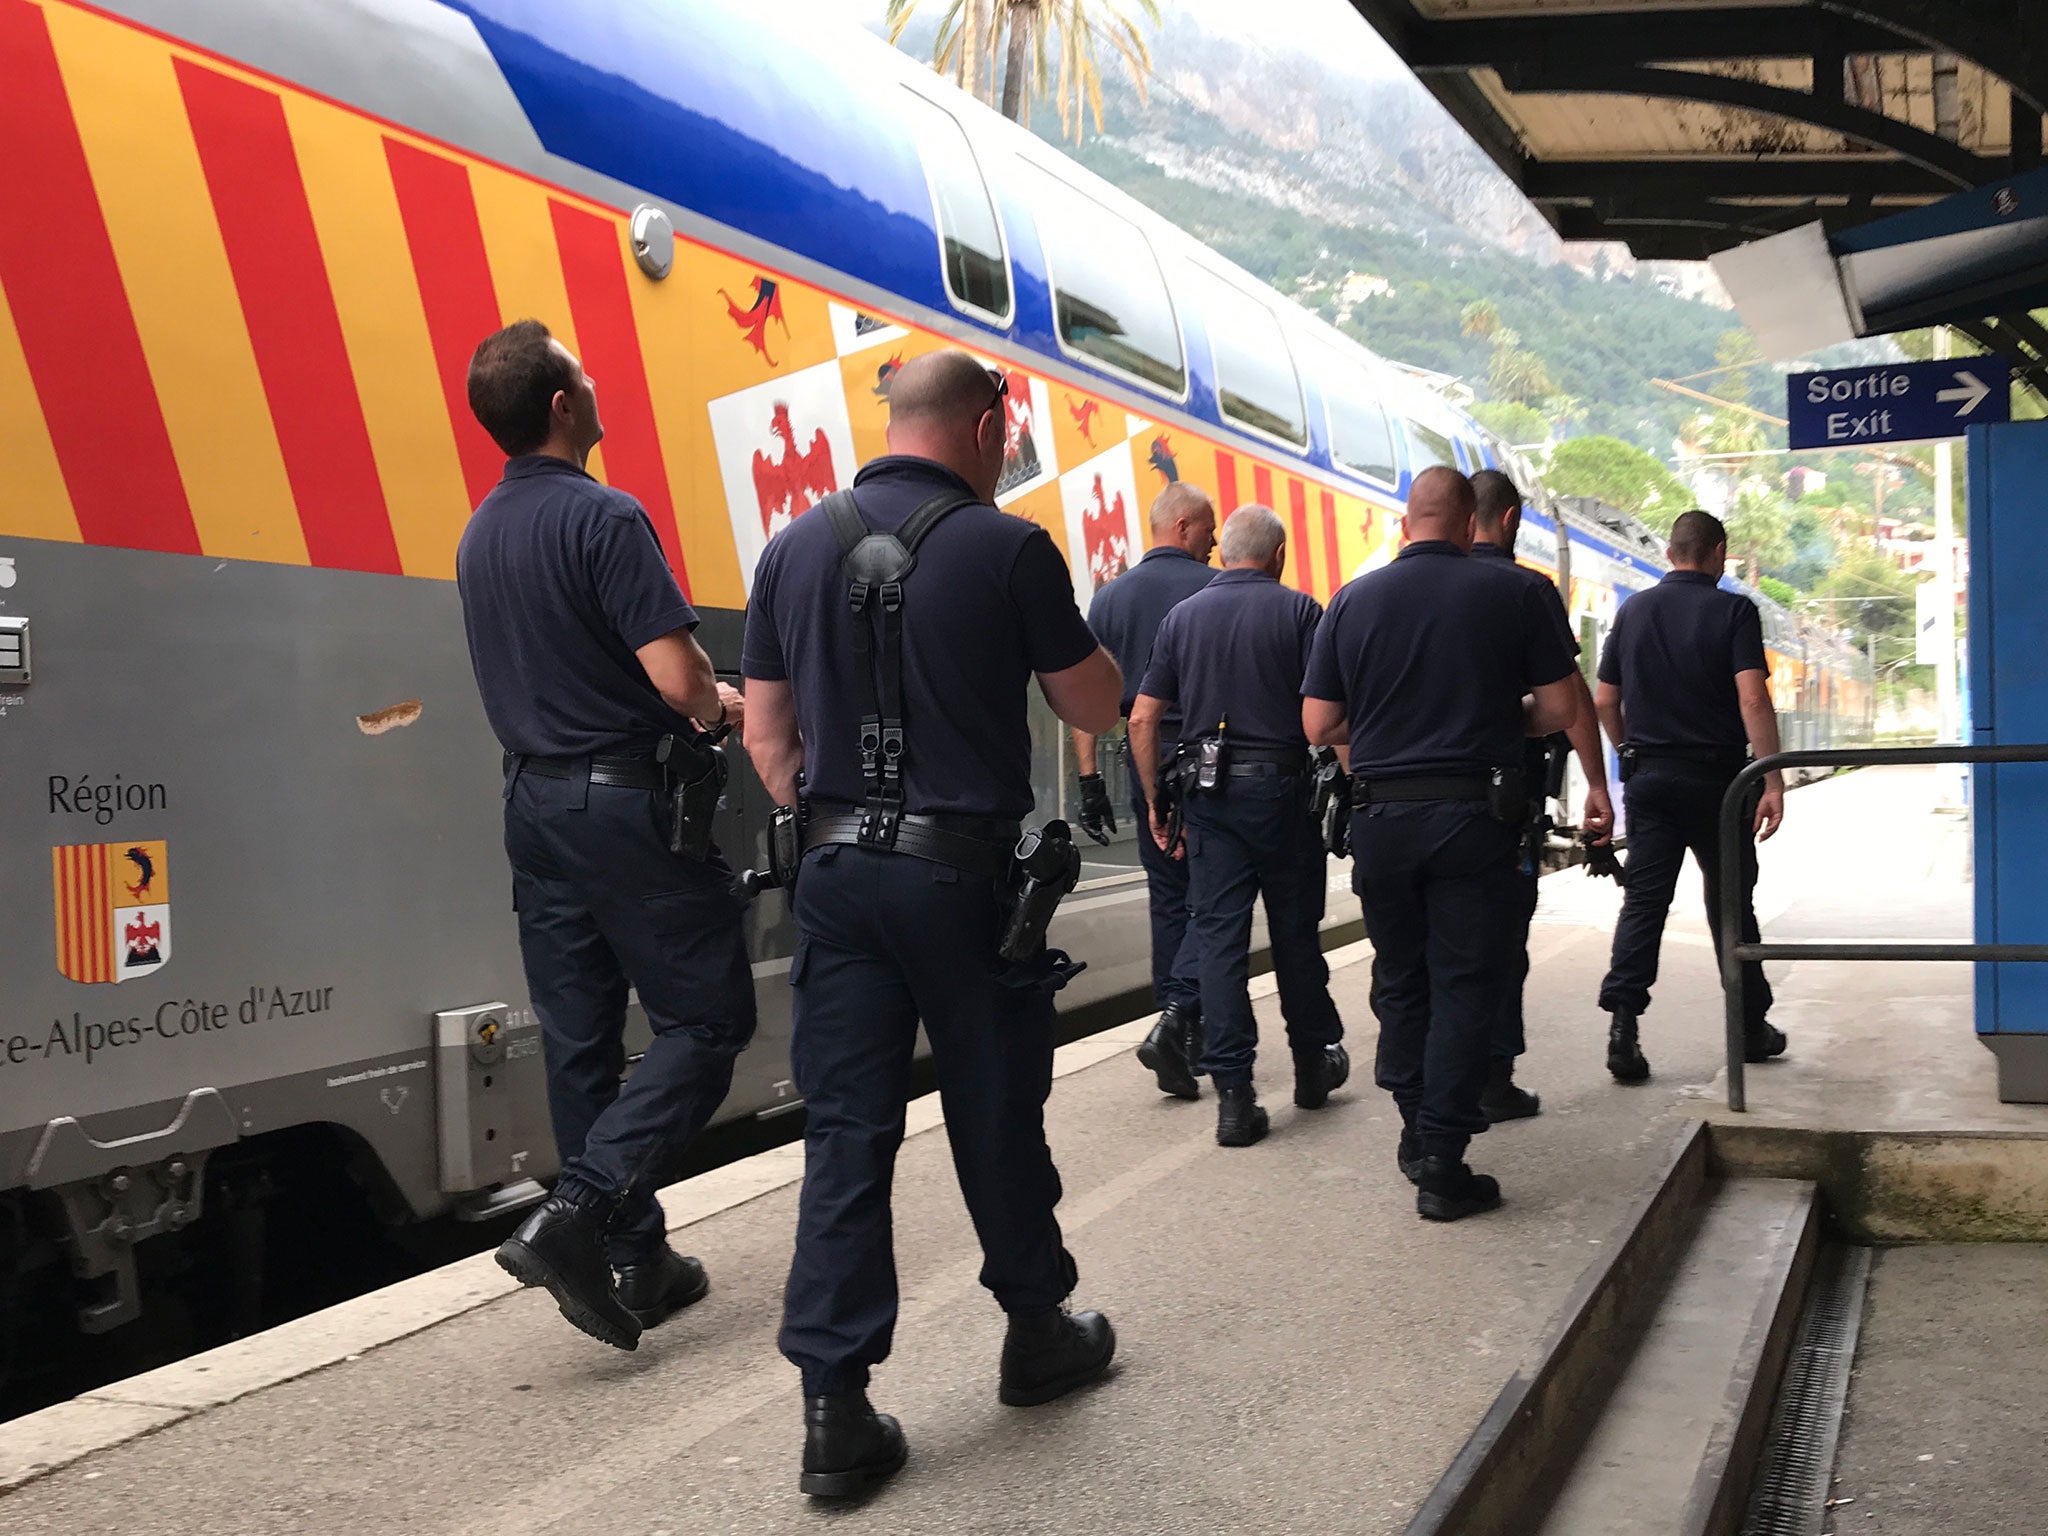 French police routinely stop unaccompanied children and put them on trains back to Italy after altering their paperwork, report alleges